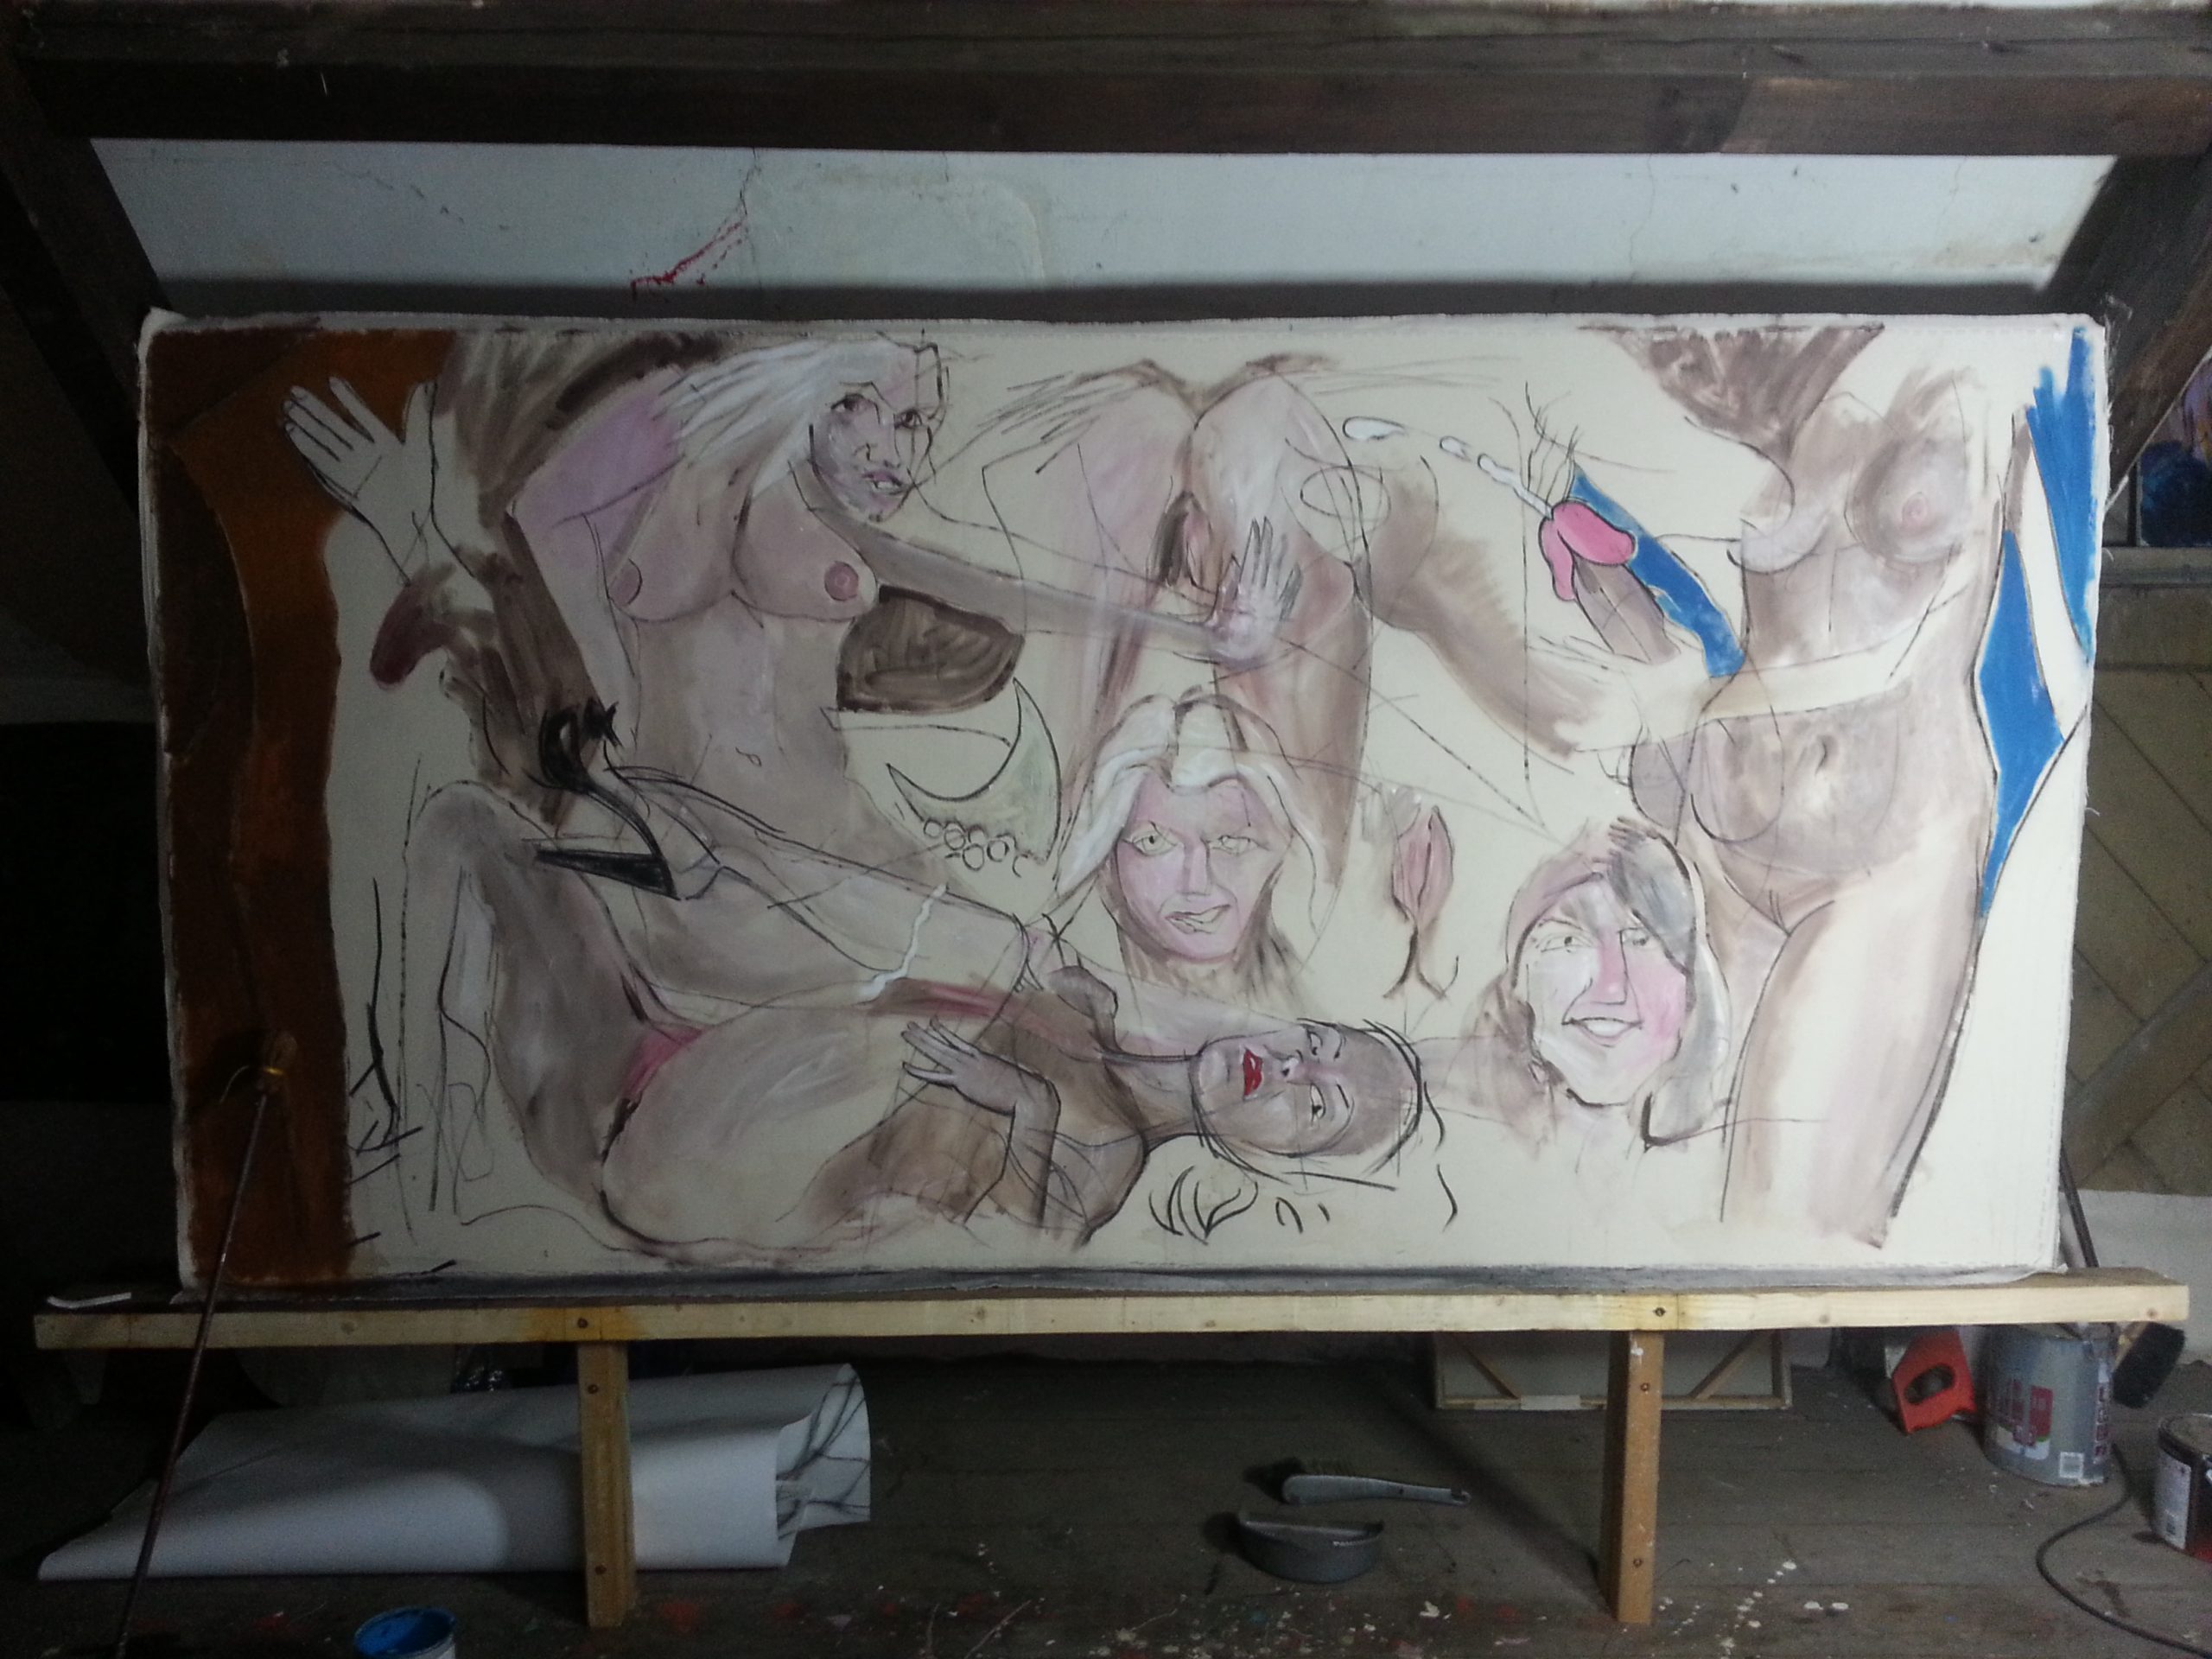 Les Dems underpainting with Pick-a-so additions